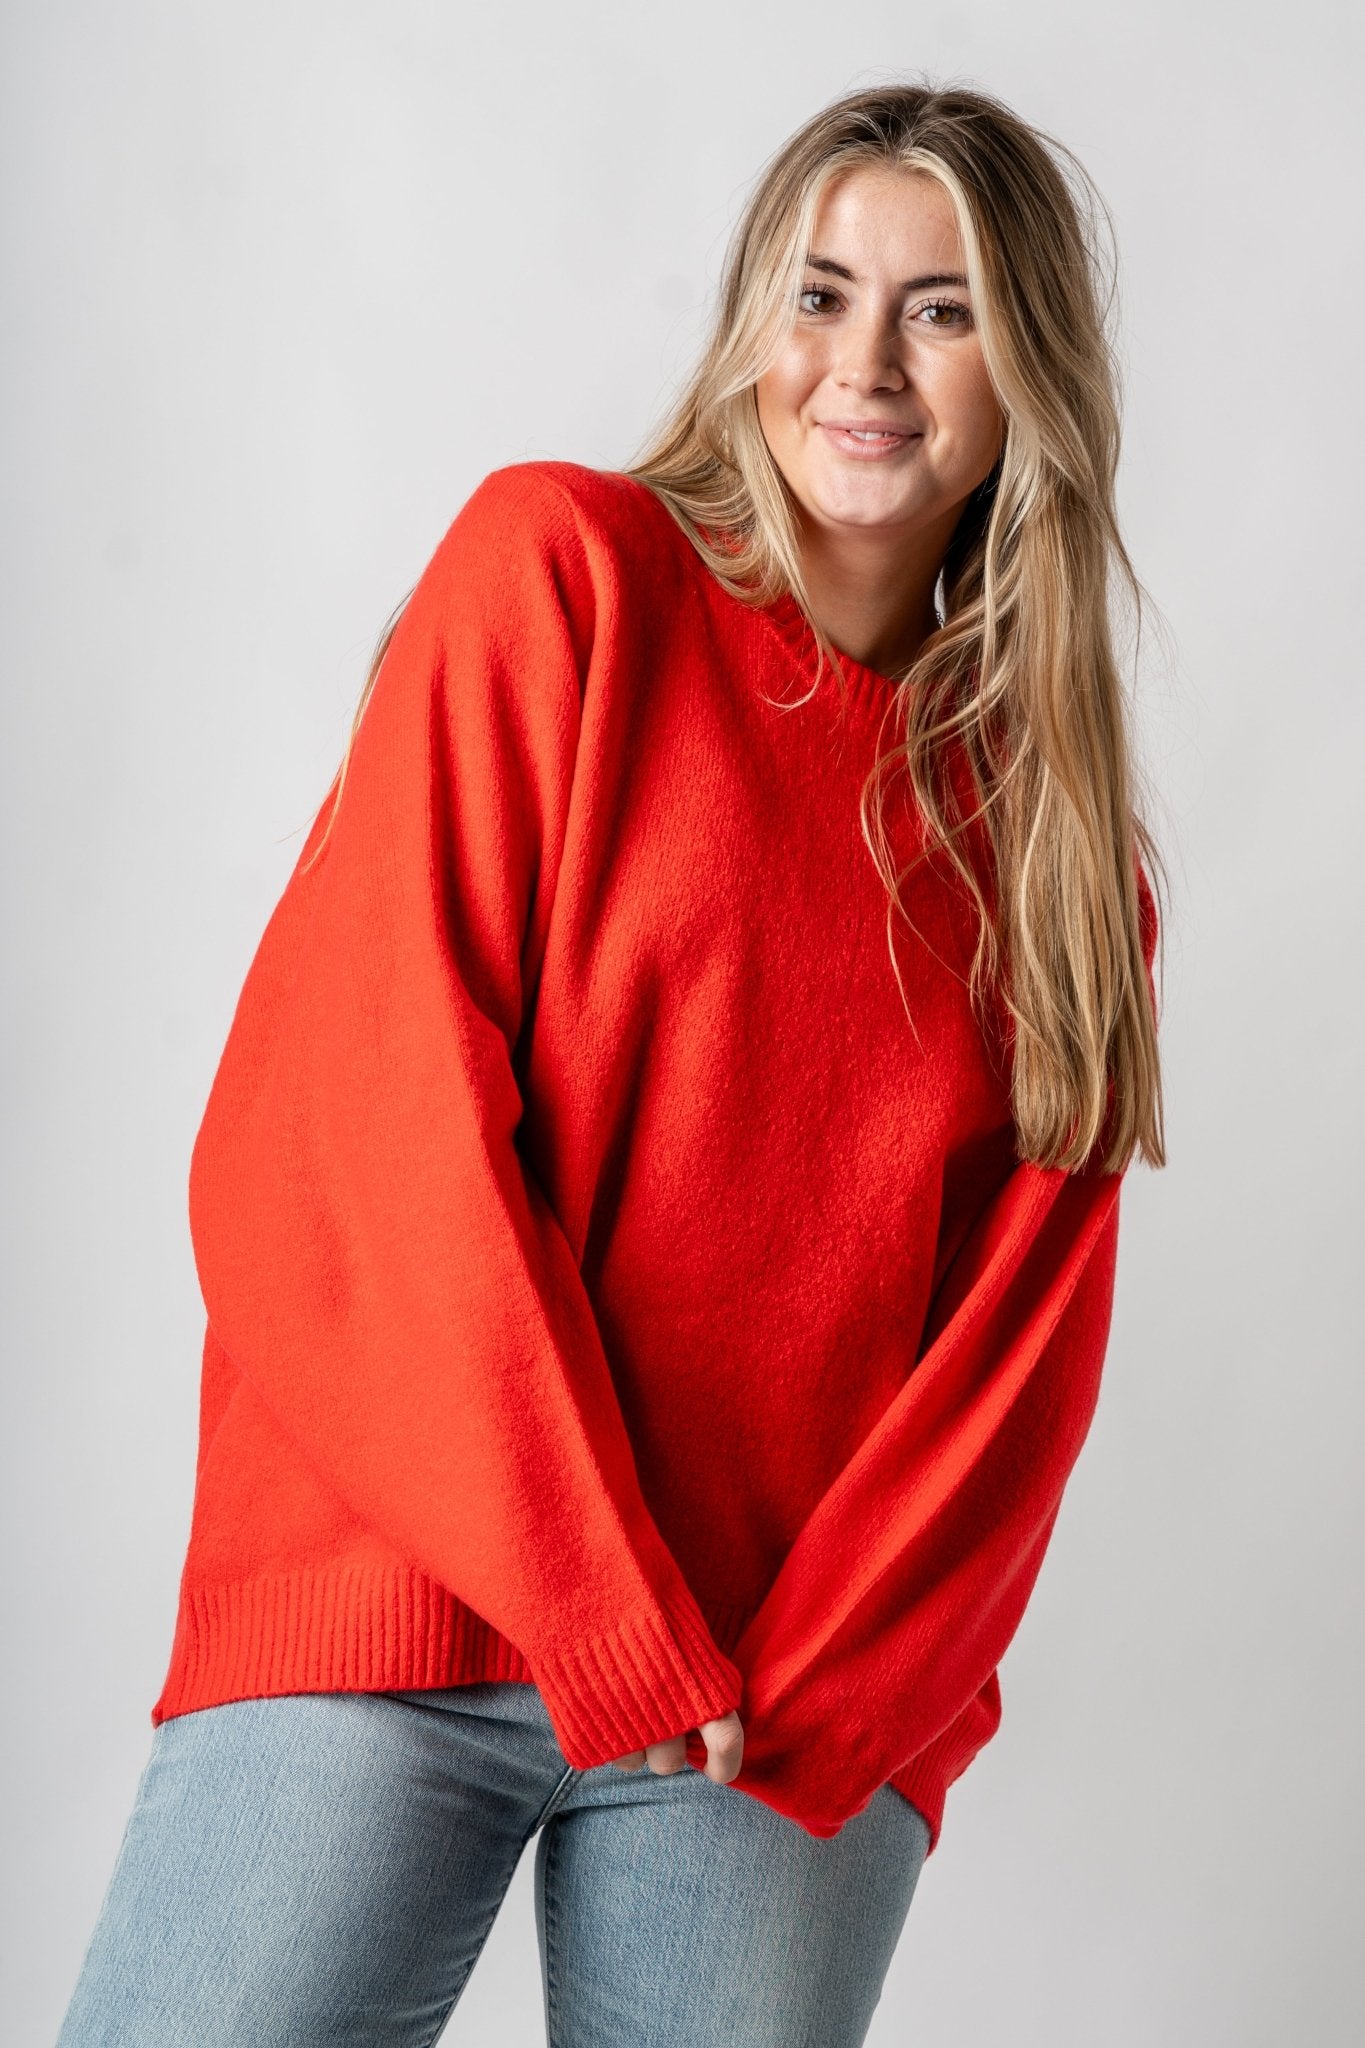 Oversized crew sweater red – Stylish Sweaters | Boutique Sweaters at Lush Fashion Lounge Boutique in Oklahoma City